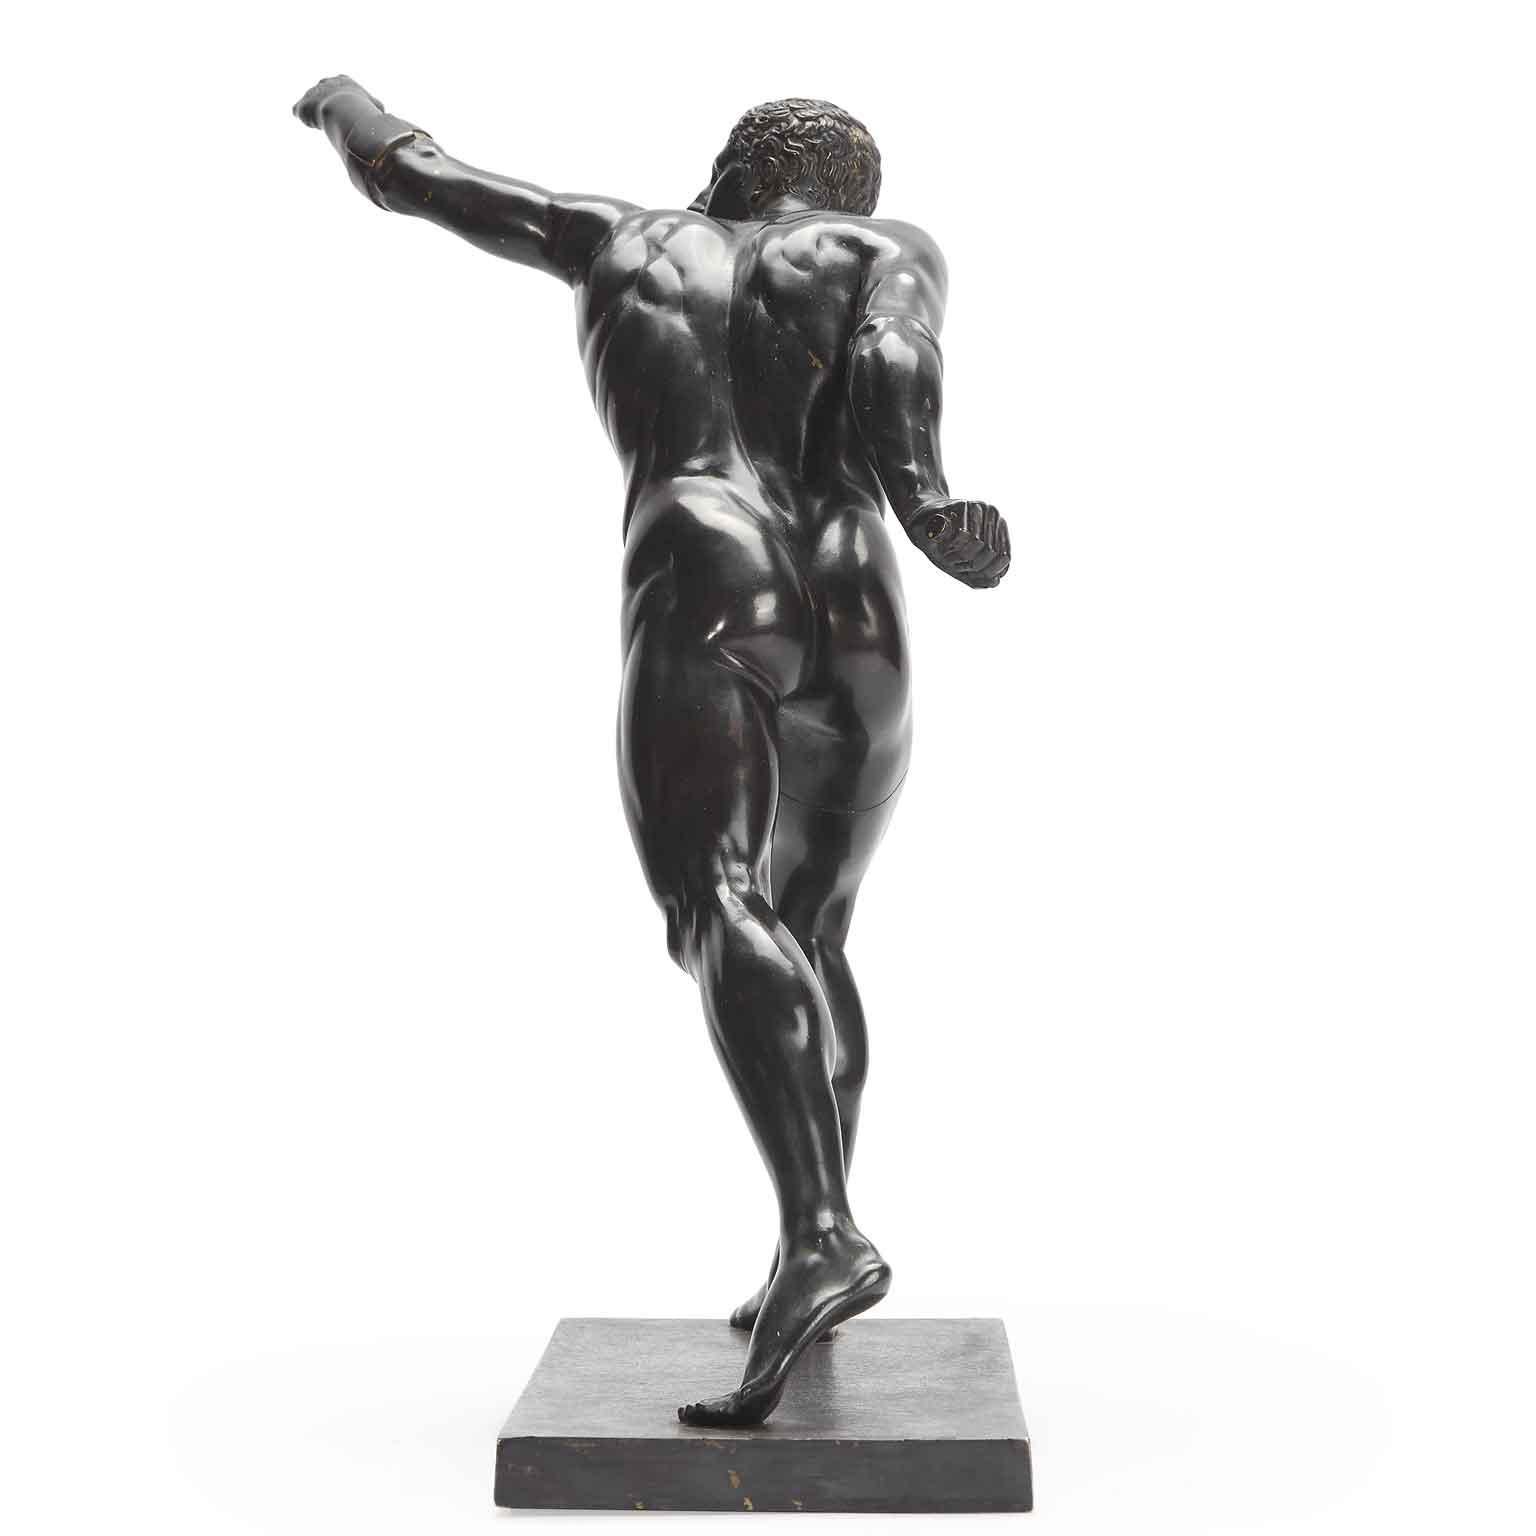 A stunning neoclassical Gladiator bronze sculpture by the Italian artist Francesco Righetti, (Roma 1749-1819) realized in Rome in 1809.

The bronze represents the famous Greek sculpture of a young fighter portrayed in the act of protecting himself